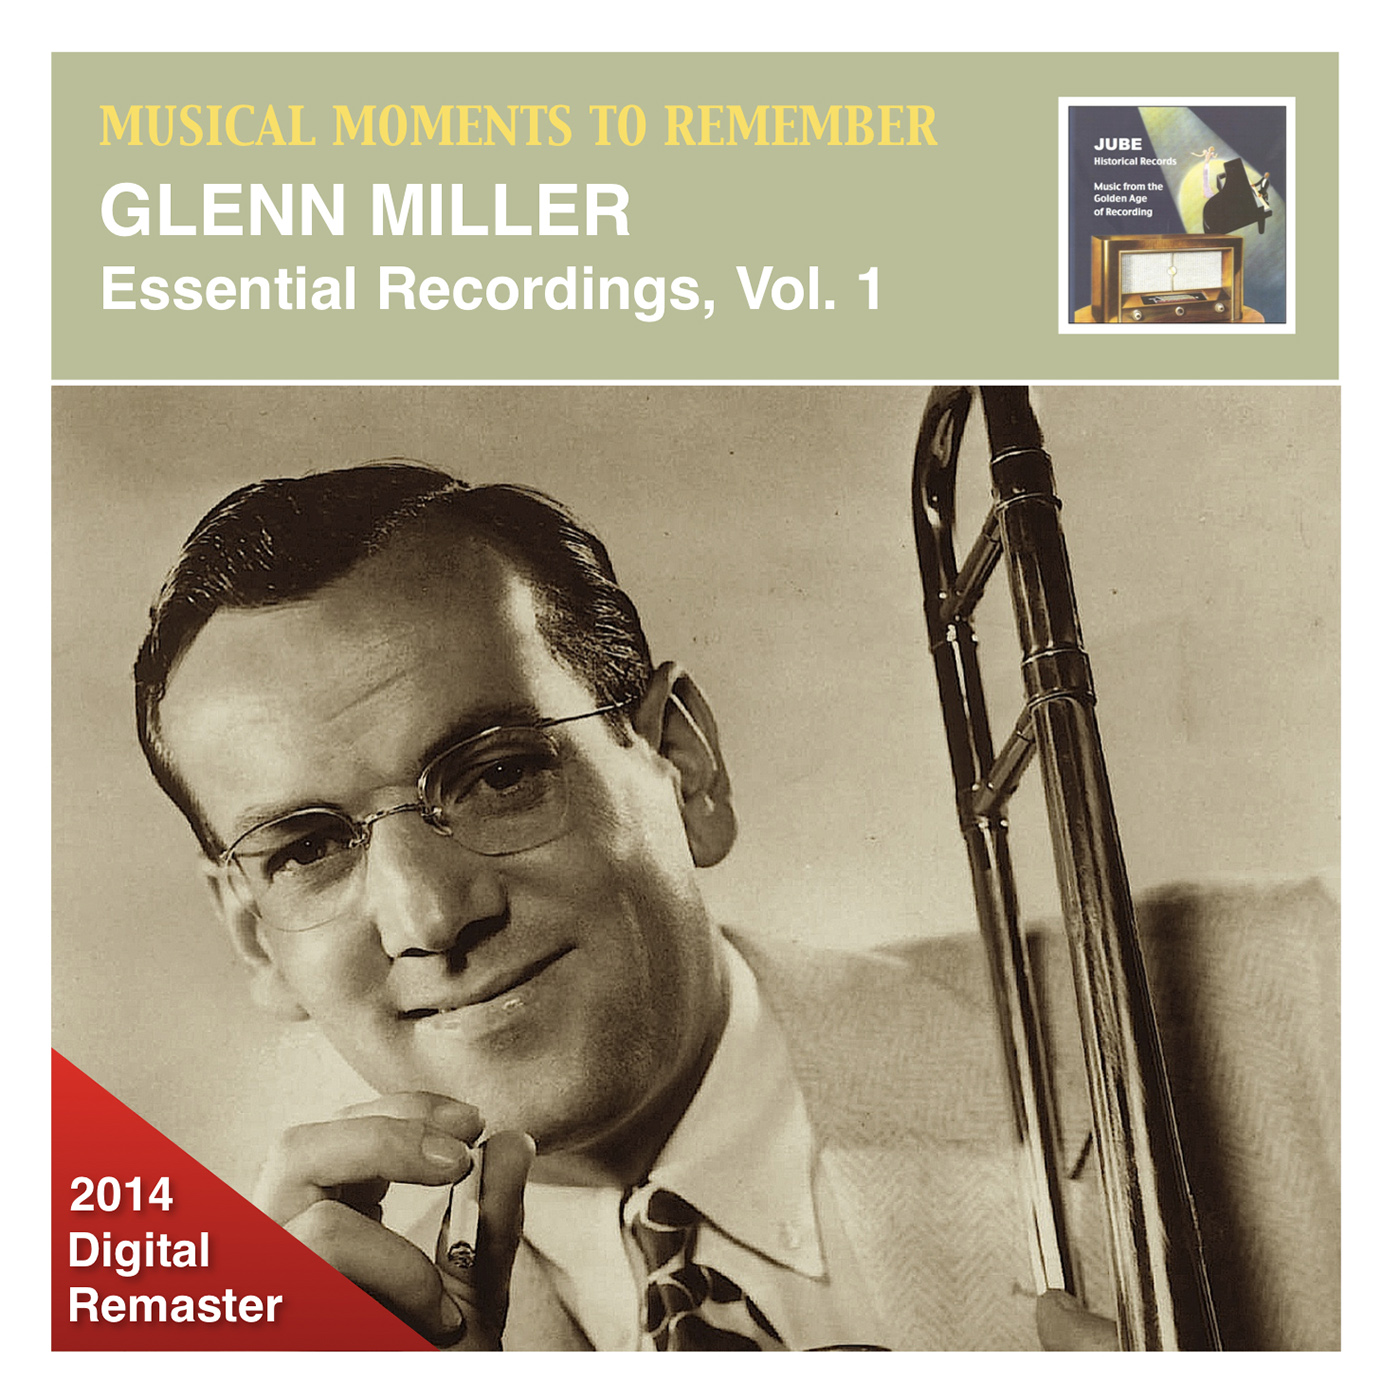 MUSICAL MOMENTS TO REMEMBER - Glenn Miller – Essential recordings, Vol. 1 (1939-1942)